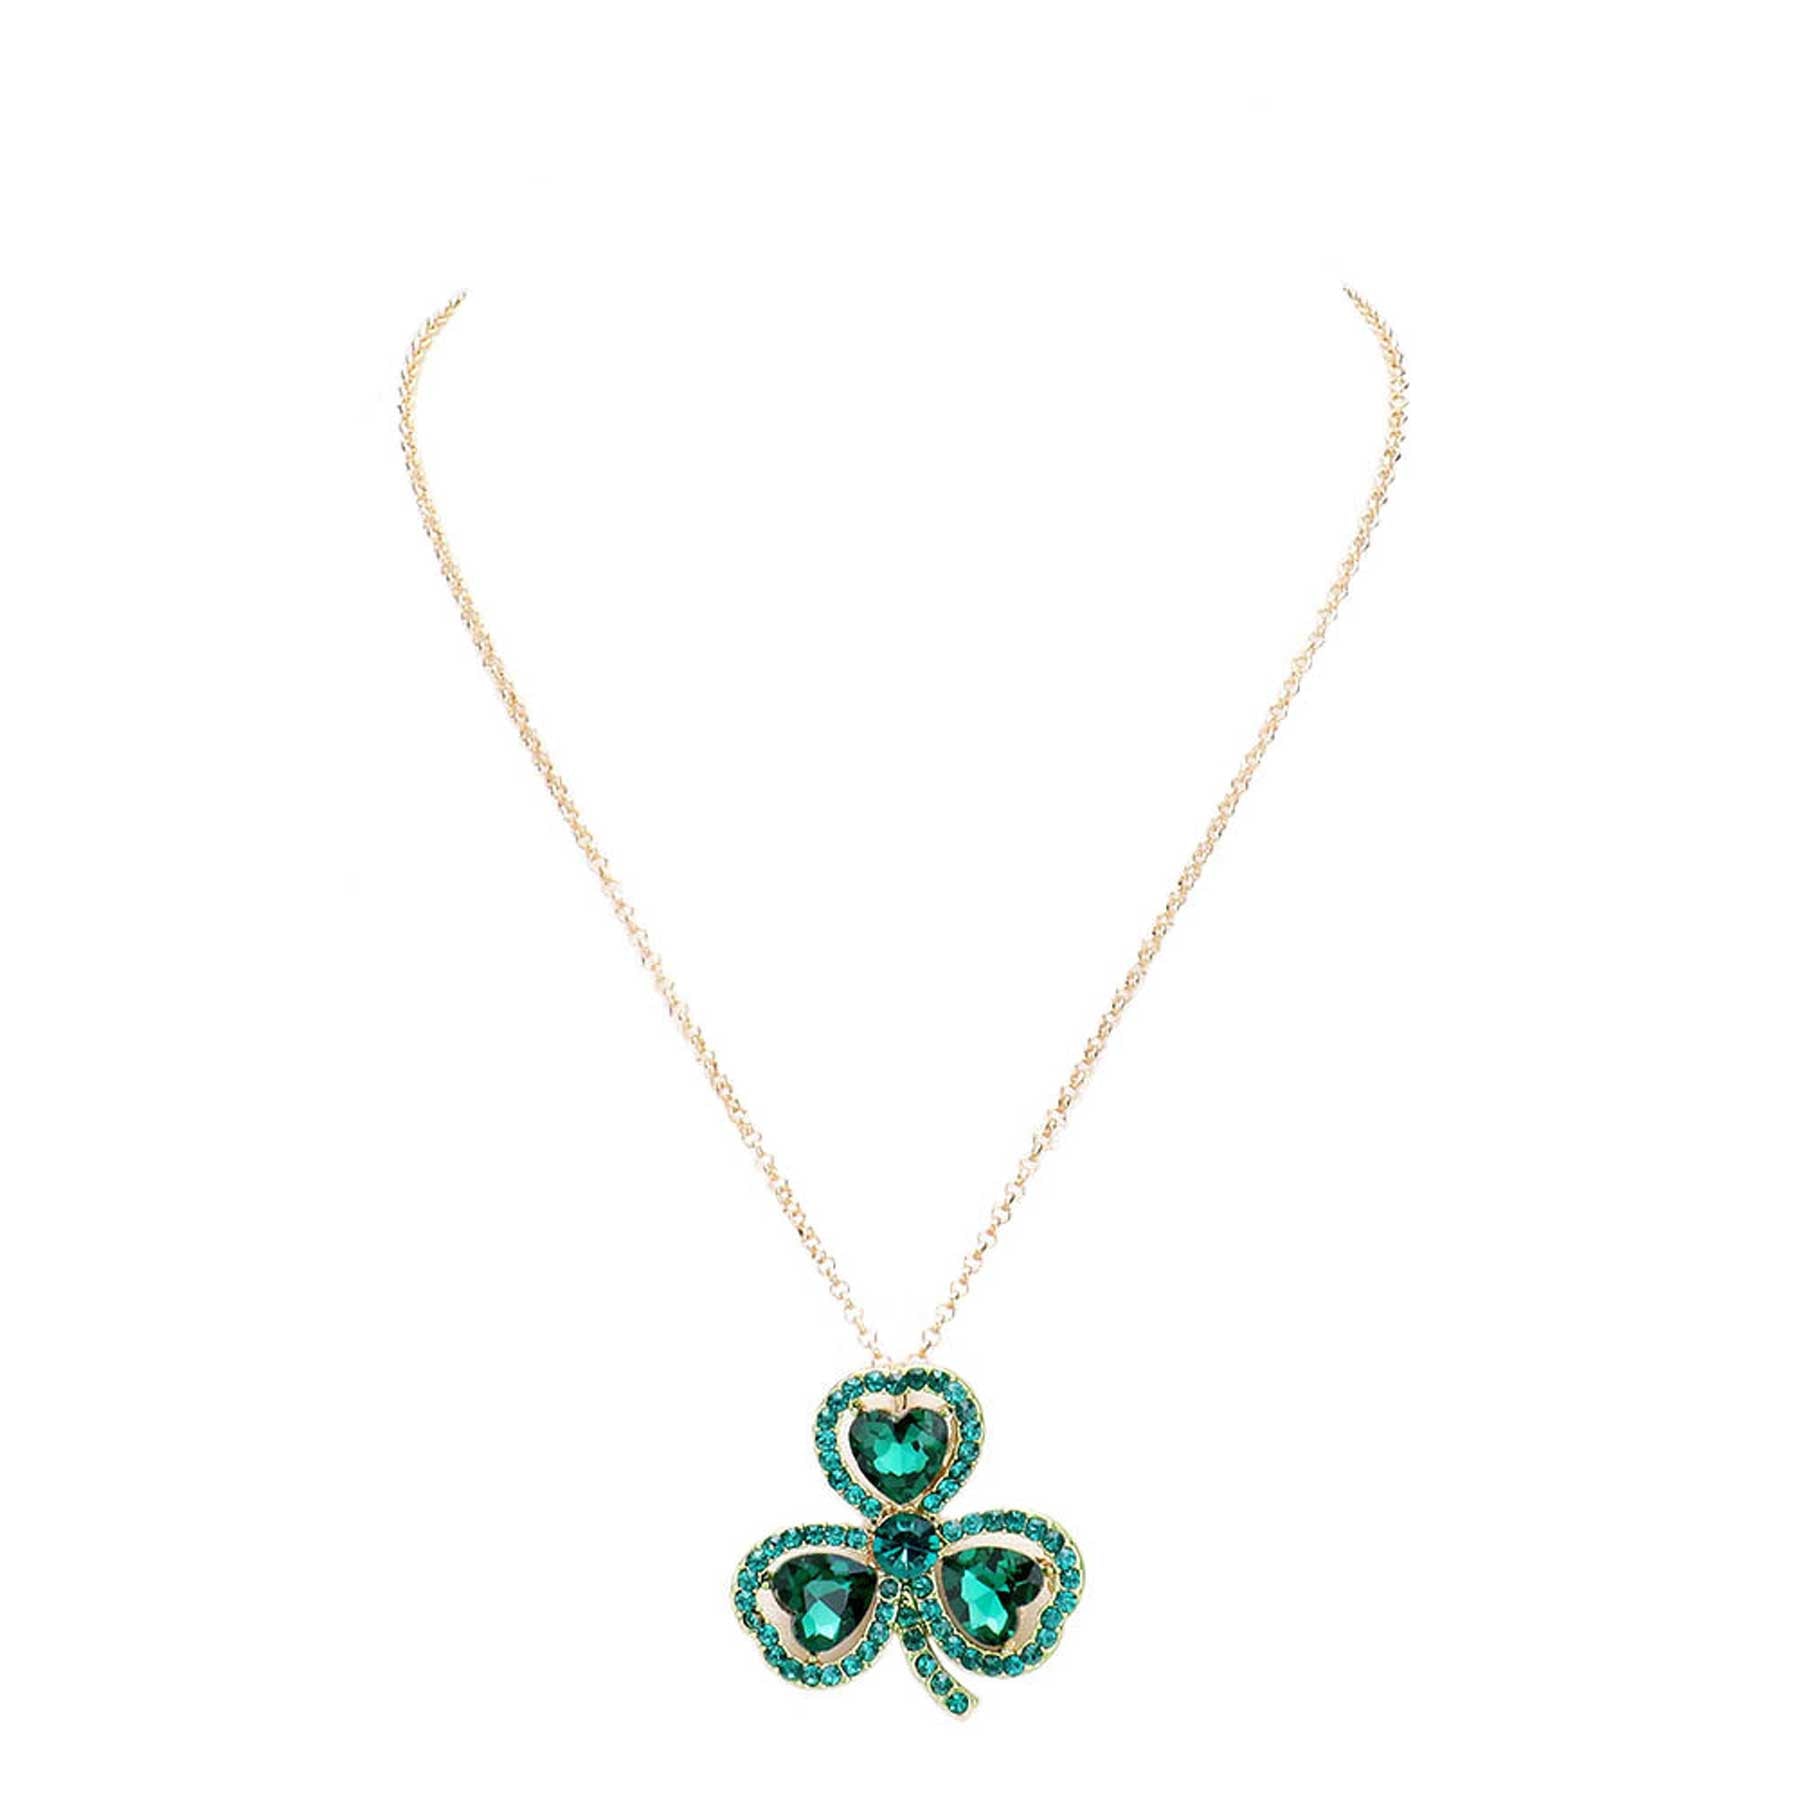 Green Gold Heart Crystal Rhinestone Clover Pendant Necklace, put on a pop of color to complete your ensemble. This lightweight necklace matching with your St. Patrick's Day clothing. This expound your St. Patrick's Day party and attract everyone's attention. This necklace can be fit for St. Patrick's Day party, night parties, carnivals. Perfect gift idea for your loving one.